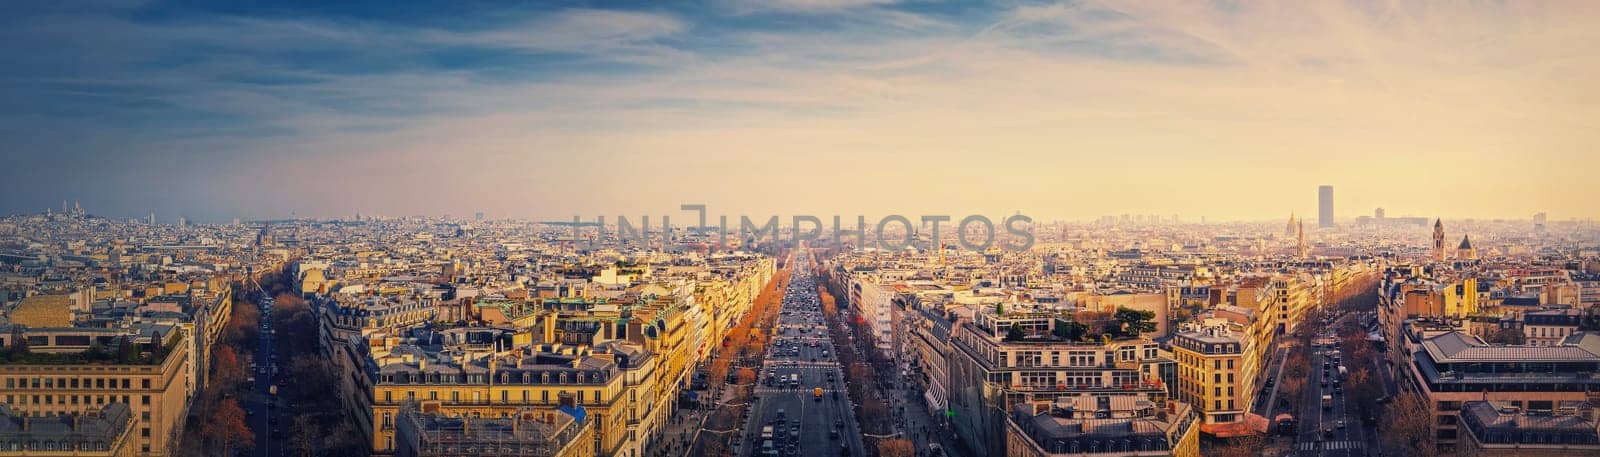 Paris cityscape sunset panorama from the triumphal arch with view to parisian avenues and Champs-Elysee in the center. Beautiful architectural landmarks on the horizon